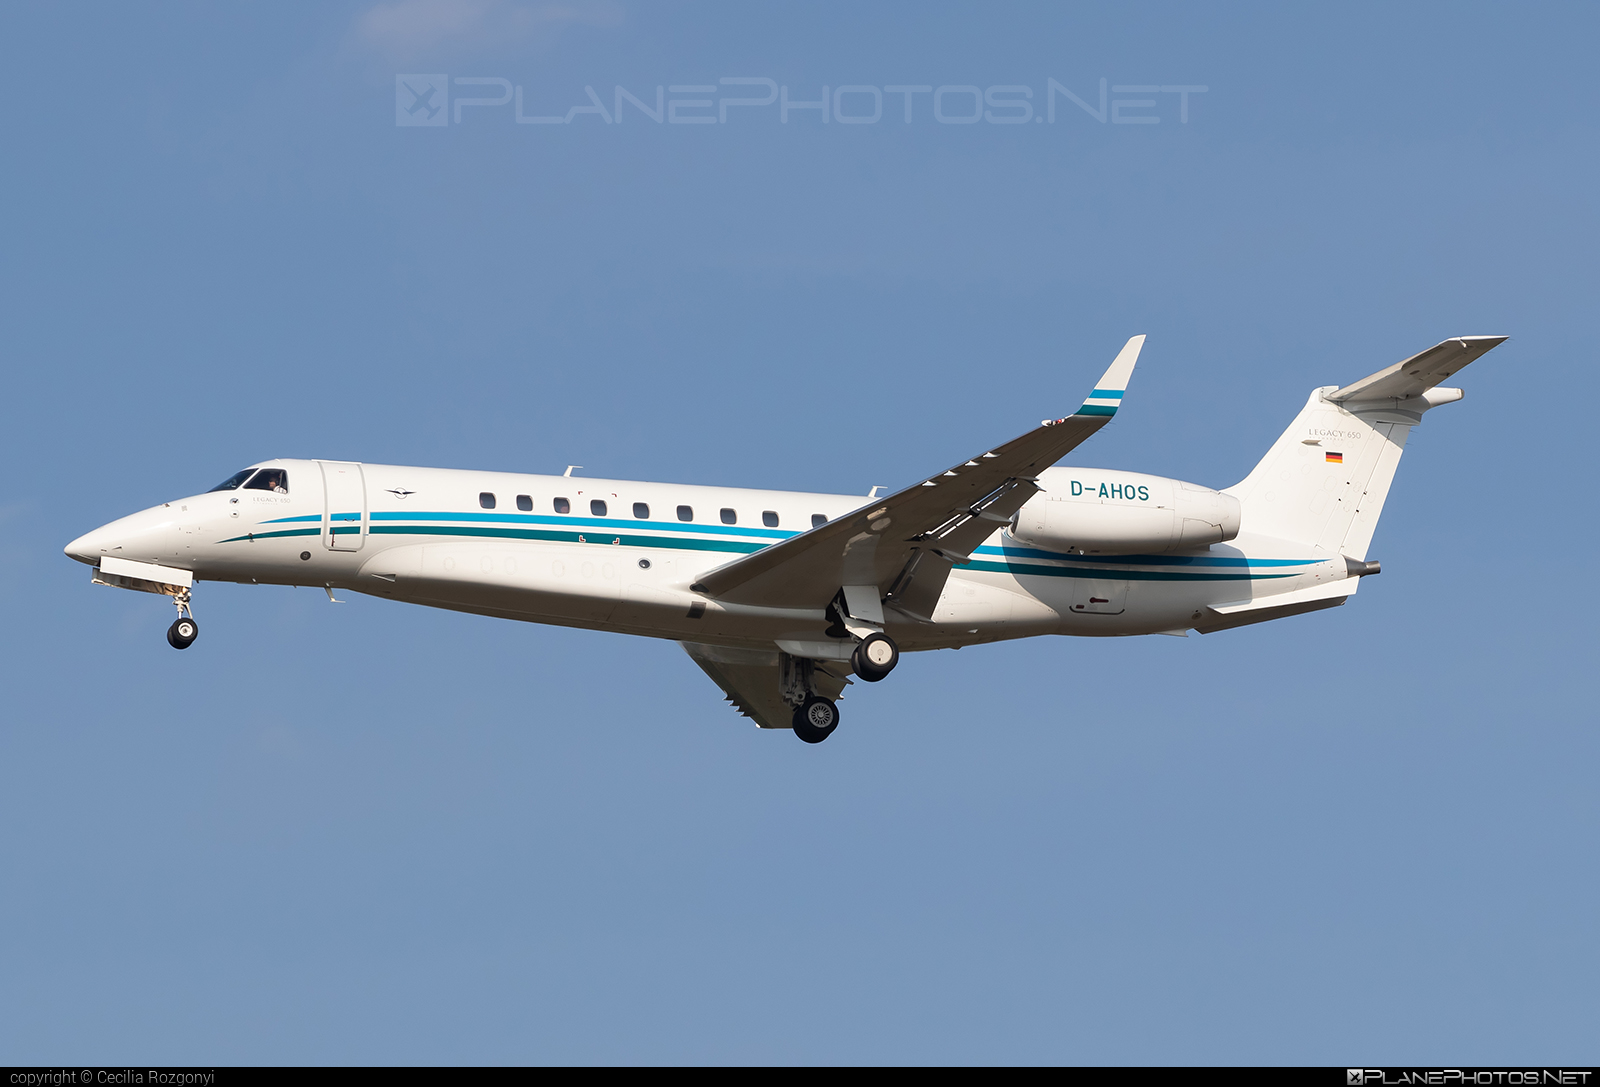 Embraer Legacy 650 (ERJ-135BJ) - D-AHOS operated by AIR HAMBURG #embraer #embraer135 #embraerlegacy #erj135 #erj135bj #legacy650